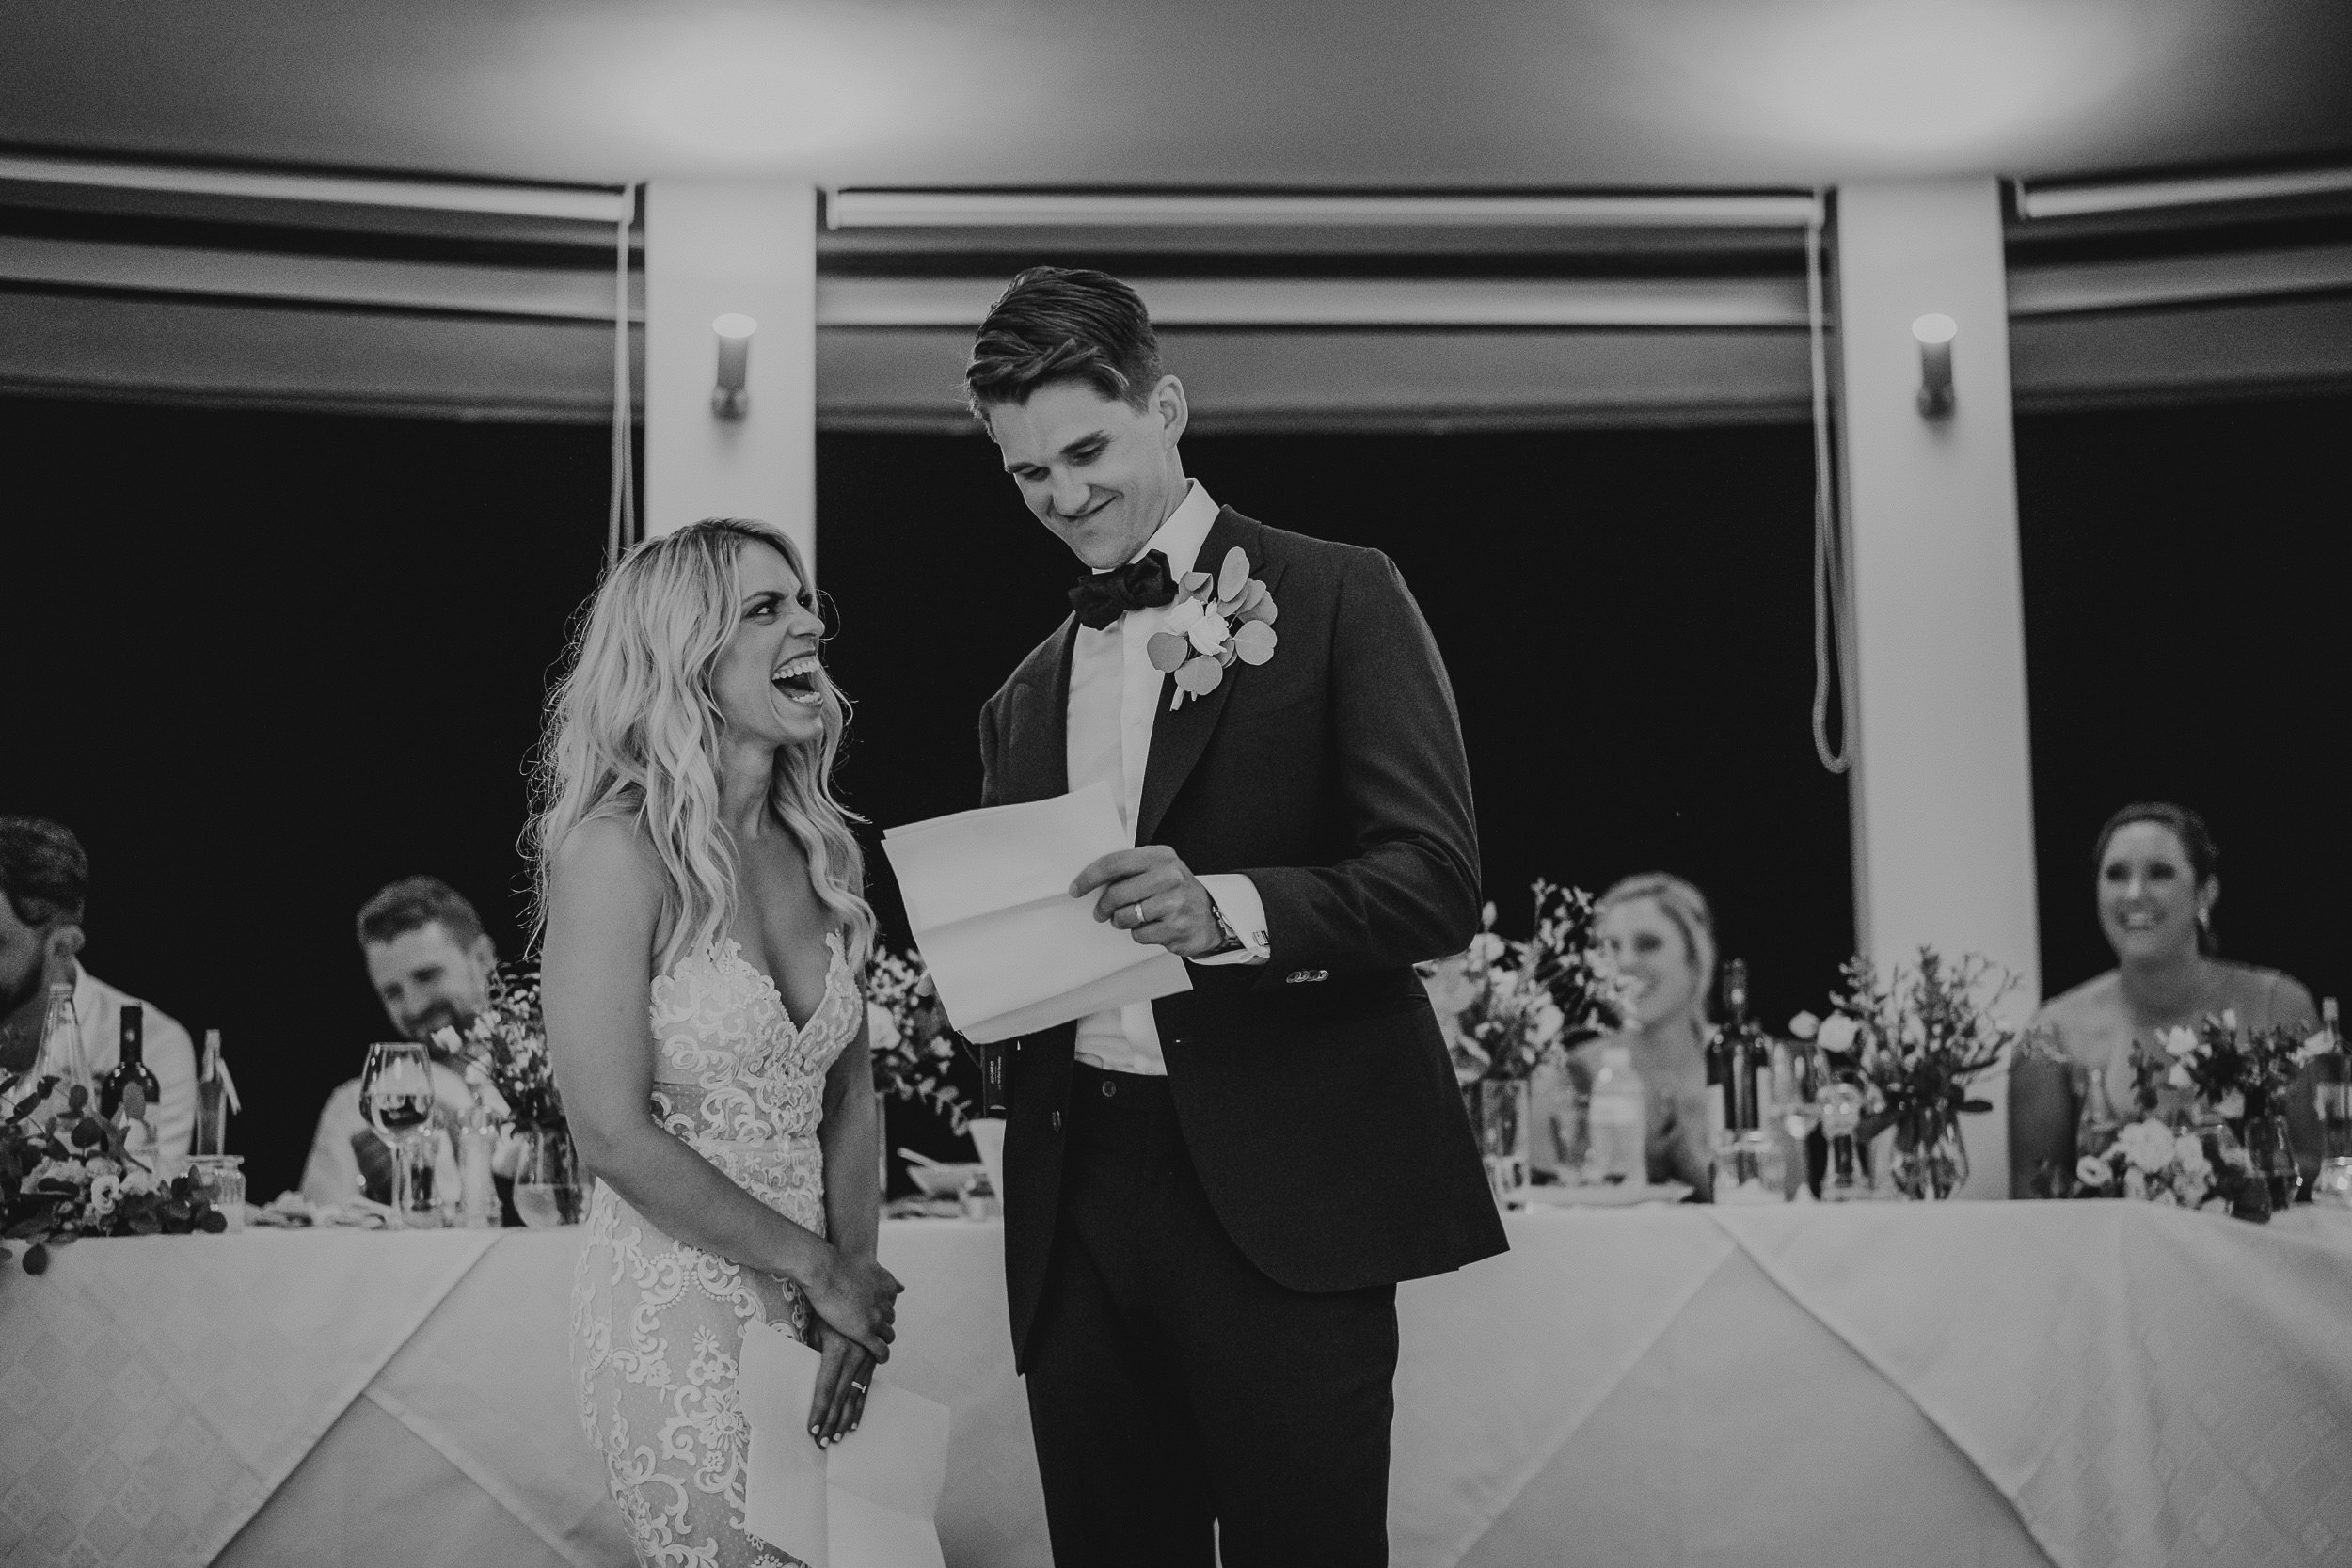 A groom and bride exchanging vows at their wedding reception.